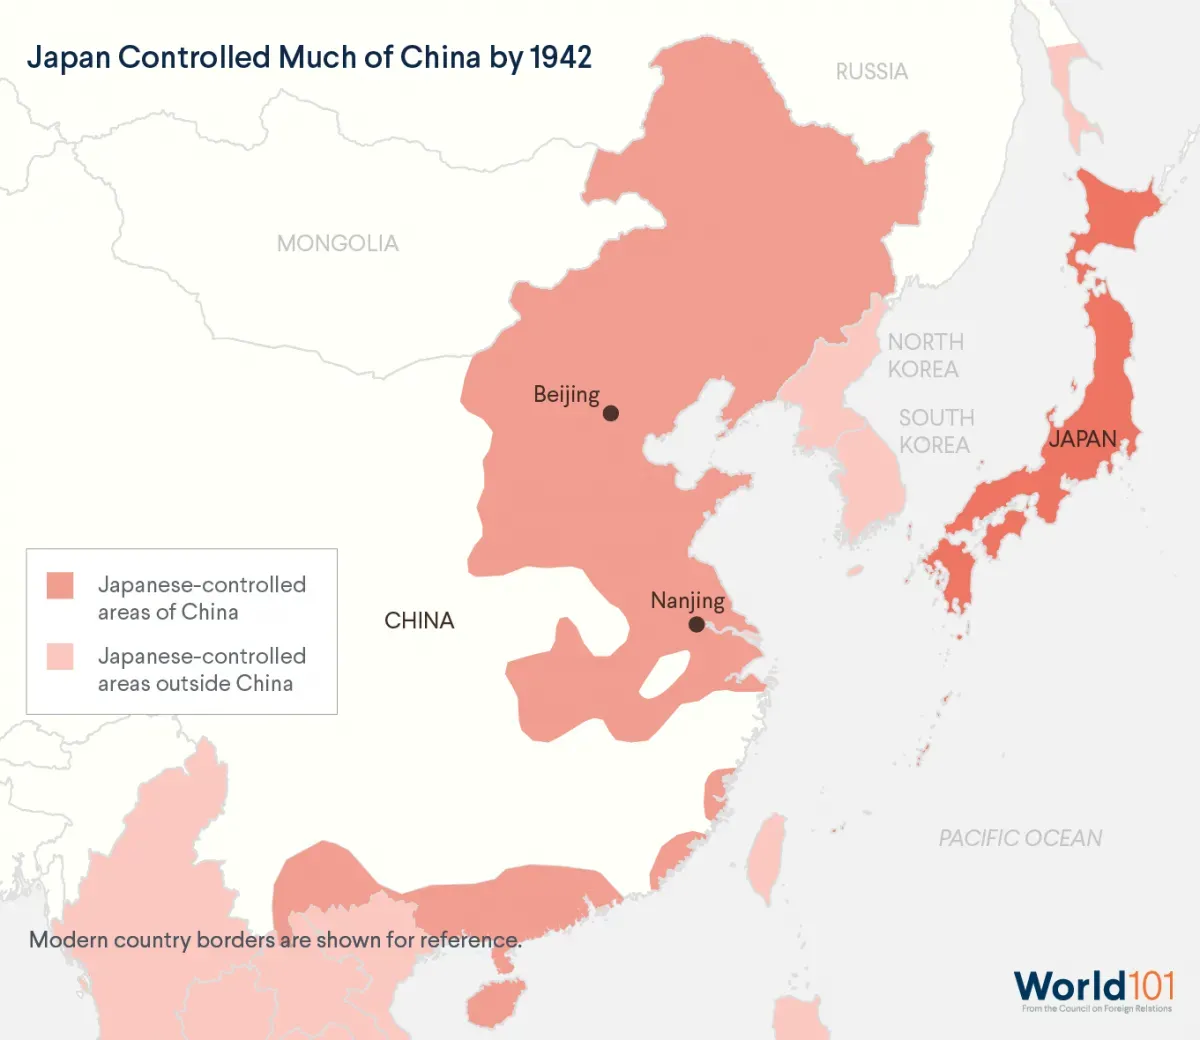 Map showing how Japan controlled much of China, particularly the northeast, by 1942. For more info contact us at world101@cfr.org.